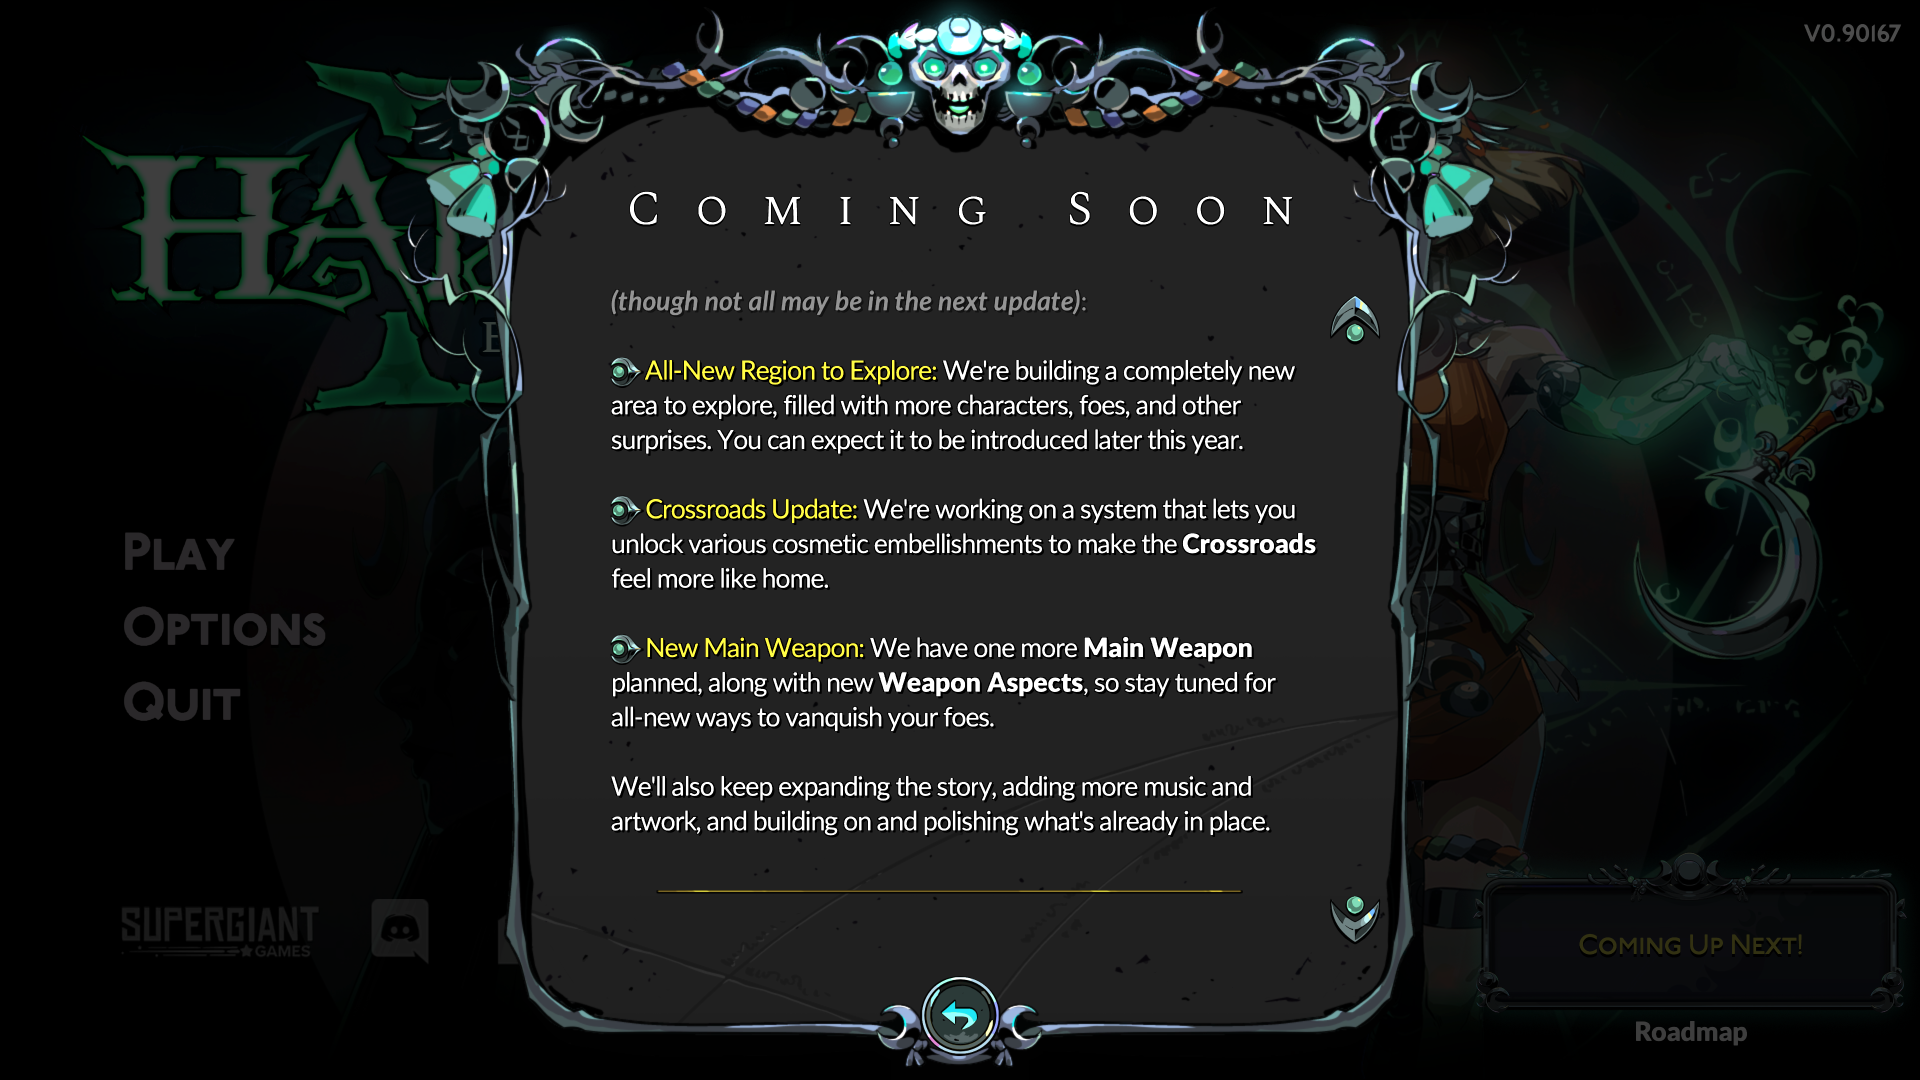 Hades 2 roadmap of early access updates on the in-game menu